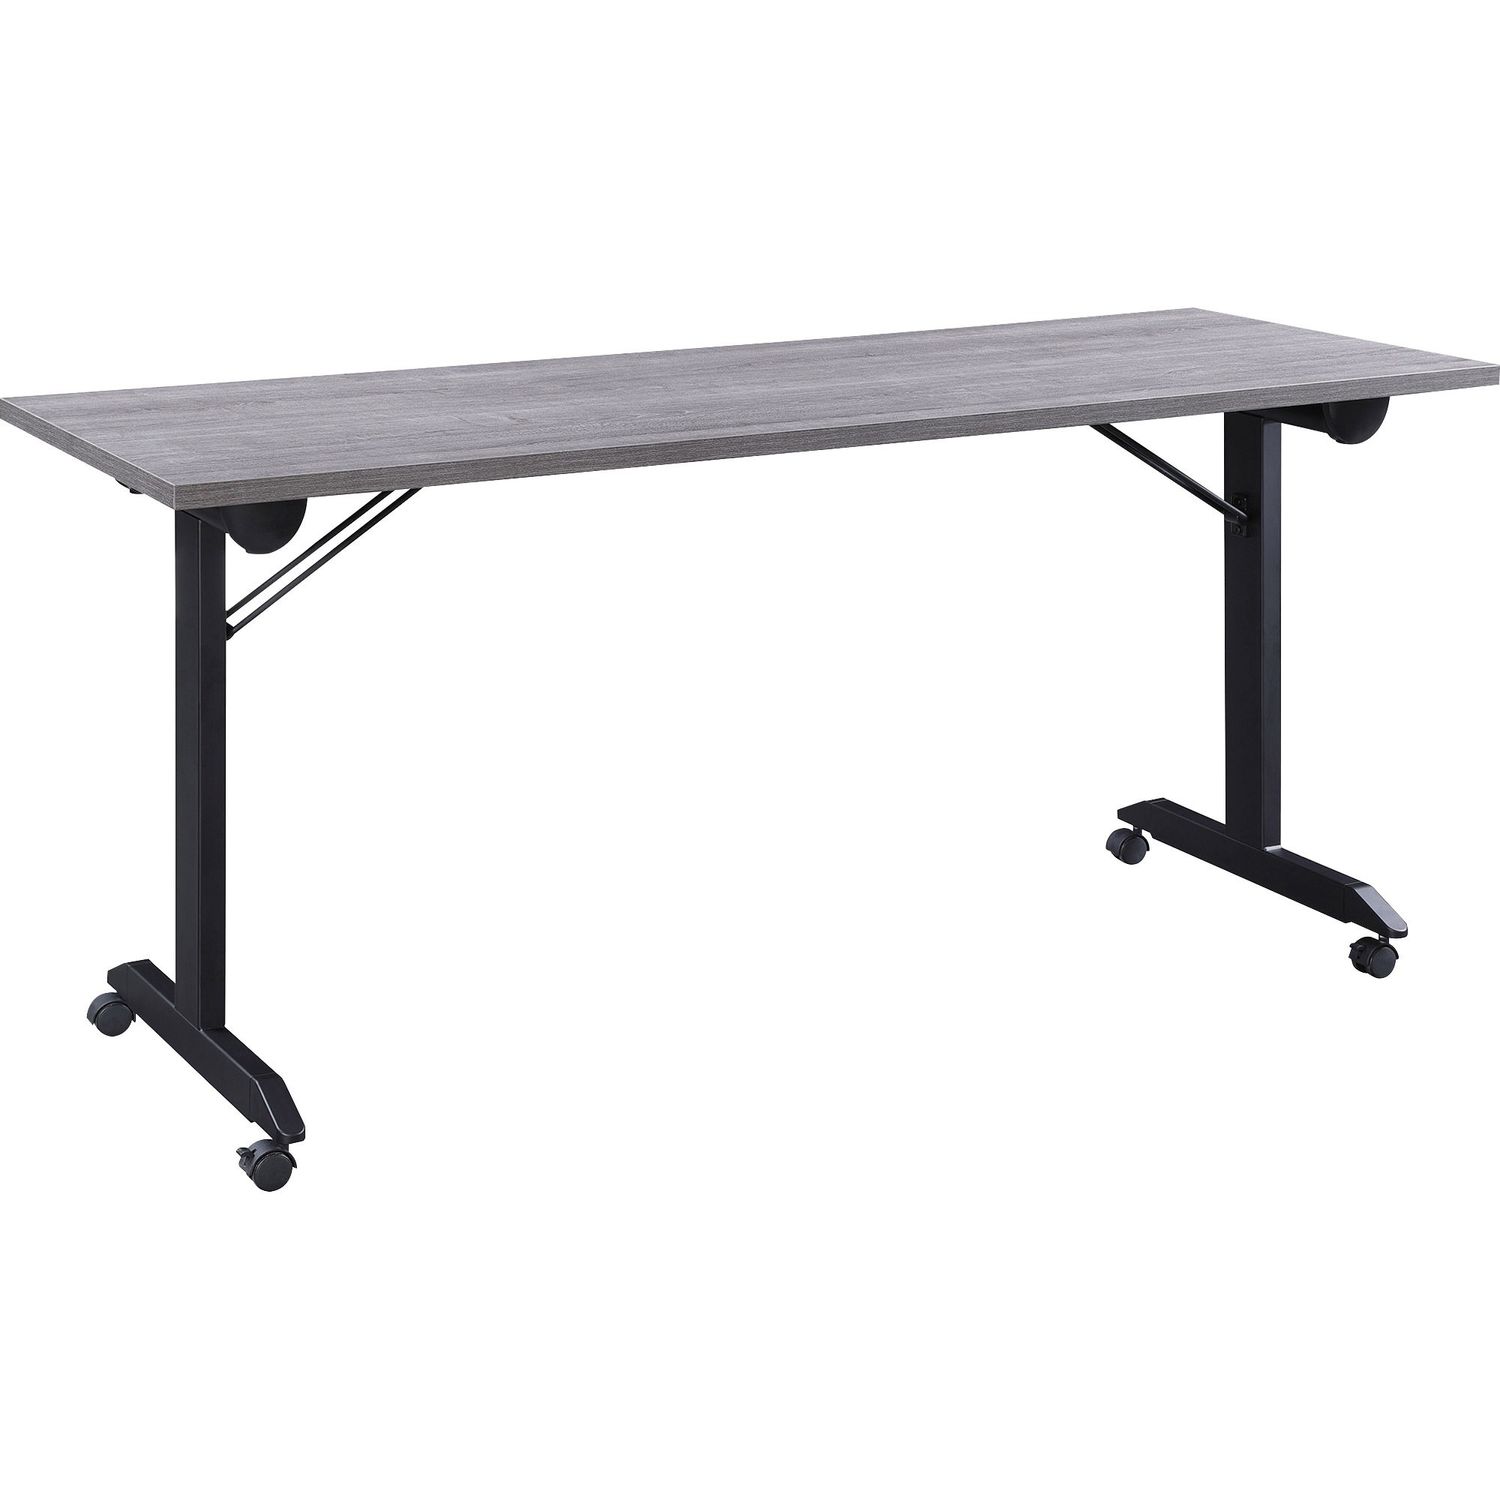 Mobile Folding Training Table Rectangle Top, Powder Coated Base, 23.63" Table Top Length x 29.50" Table Top Width, 63" Height, Assembly Required, Gray